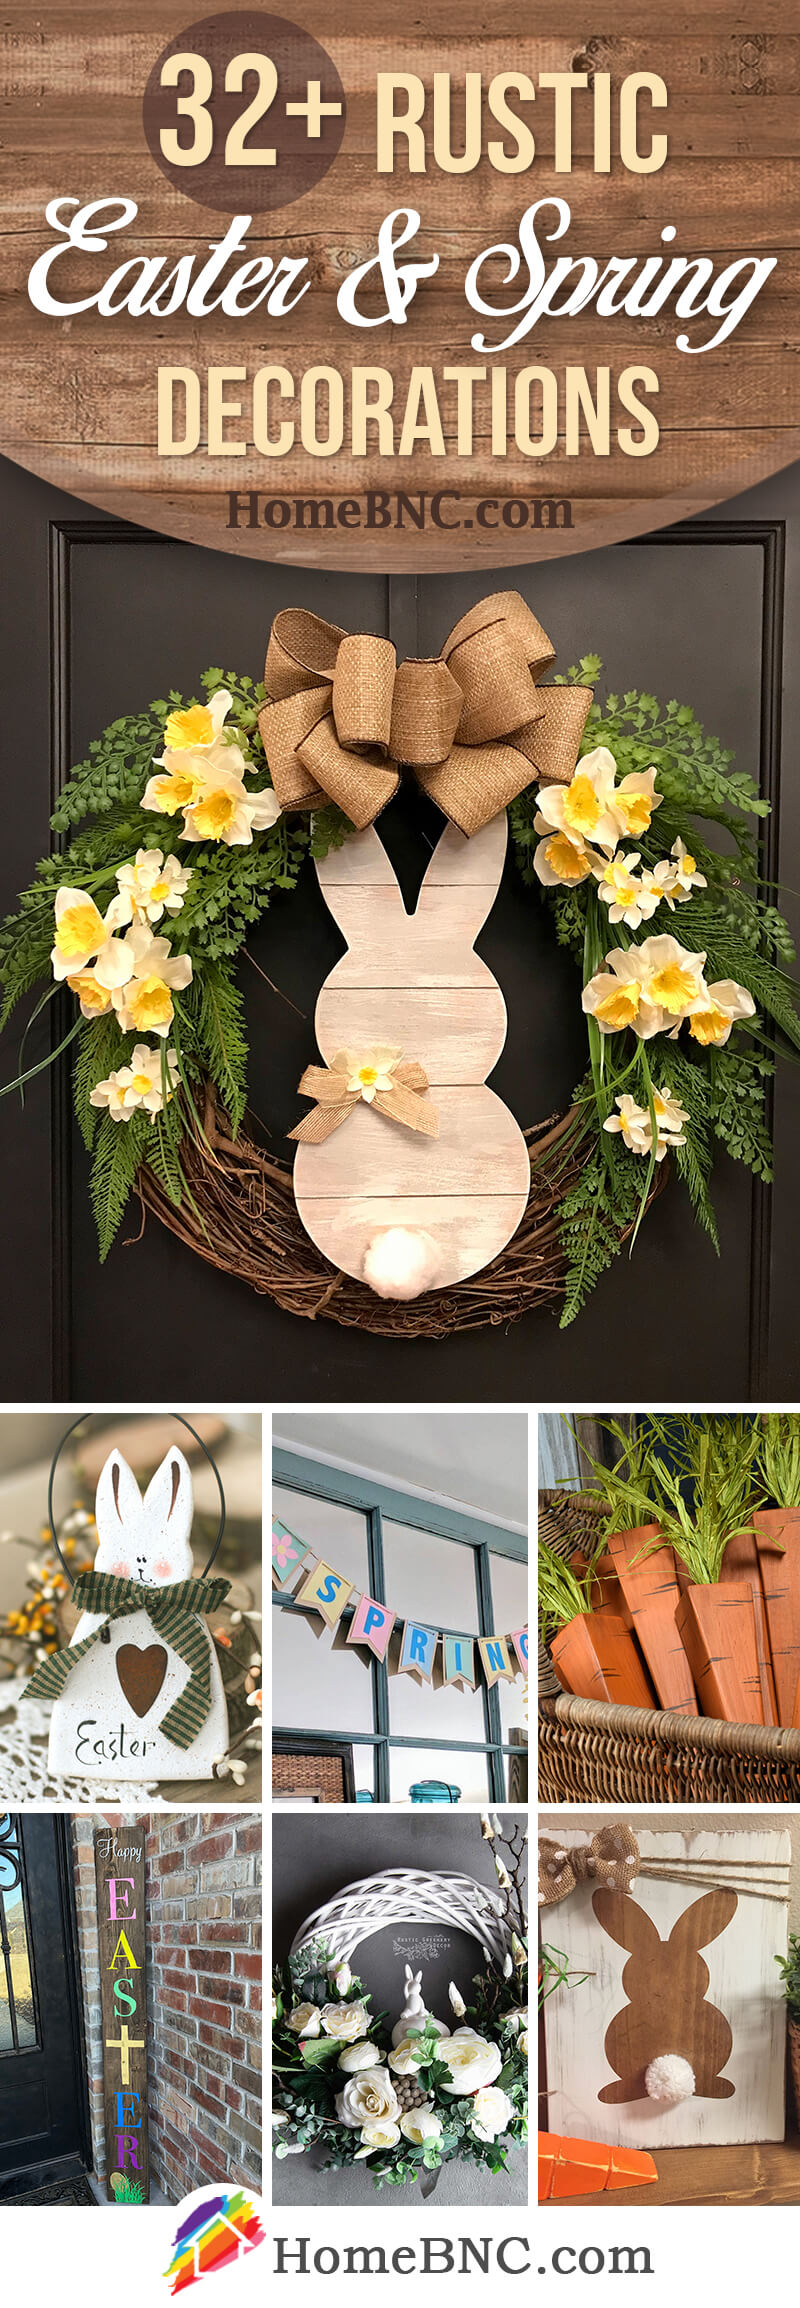 Rustic Easter and Spring Decoration Ideas